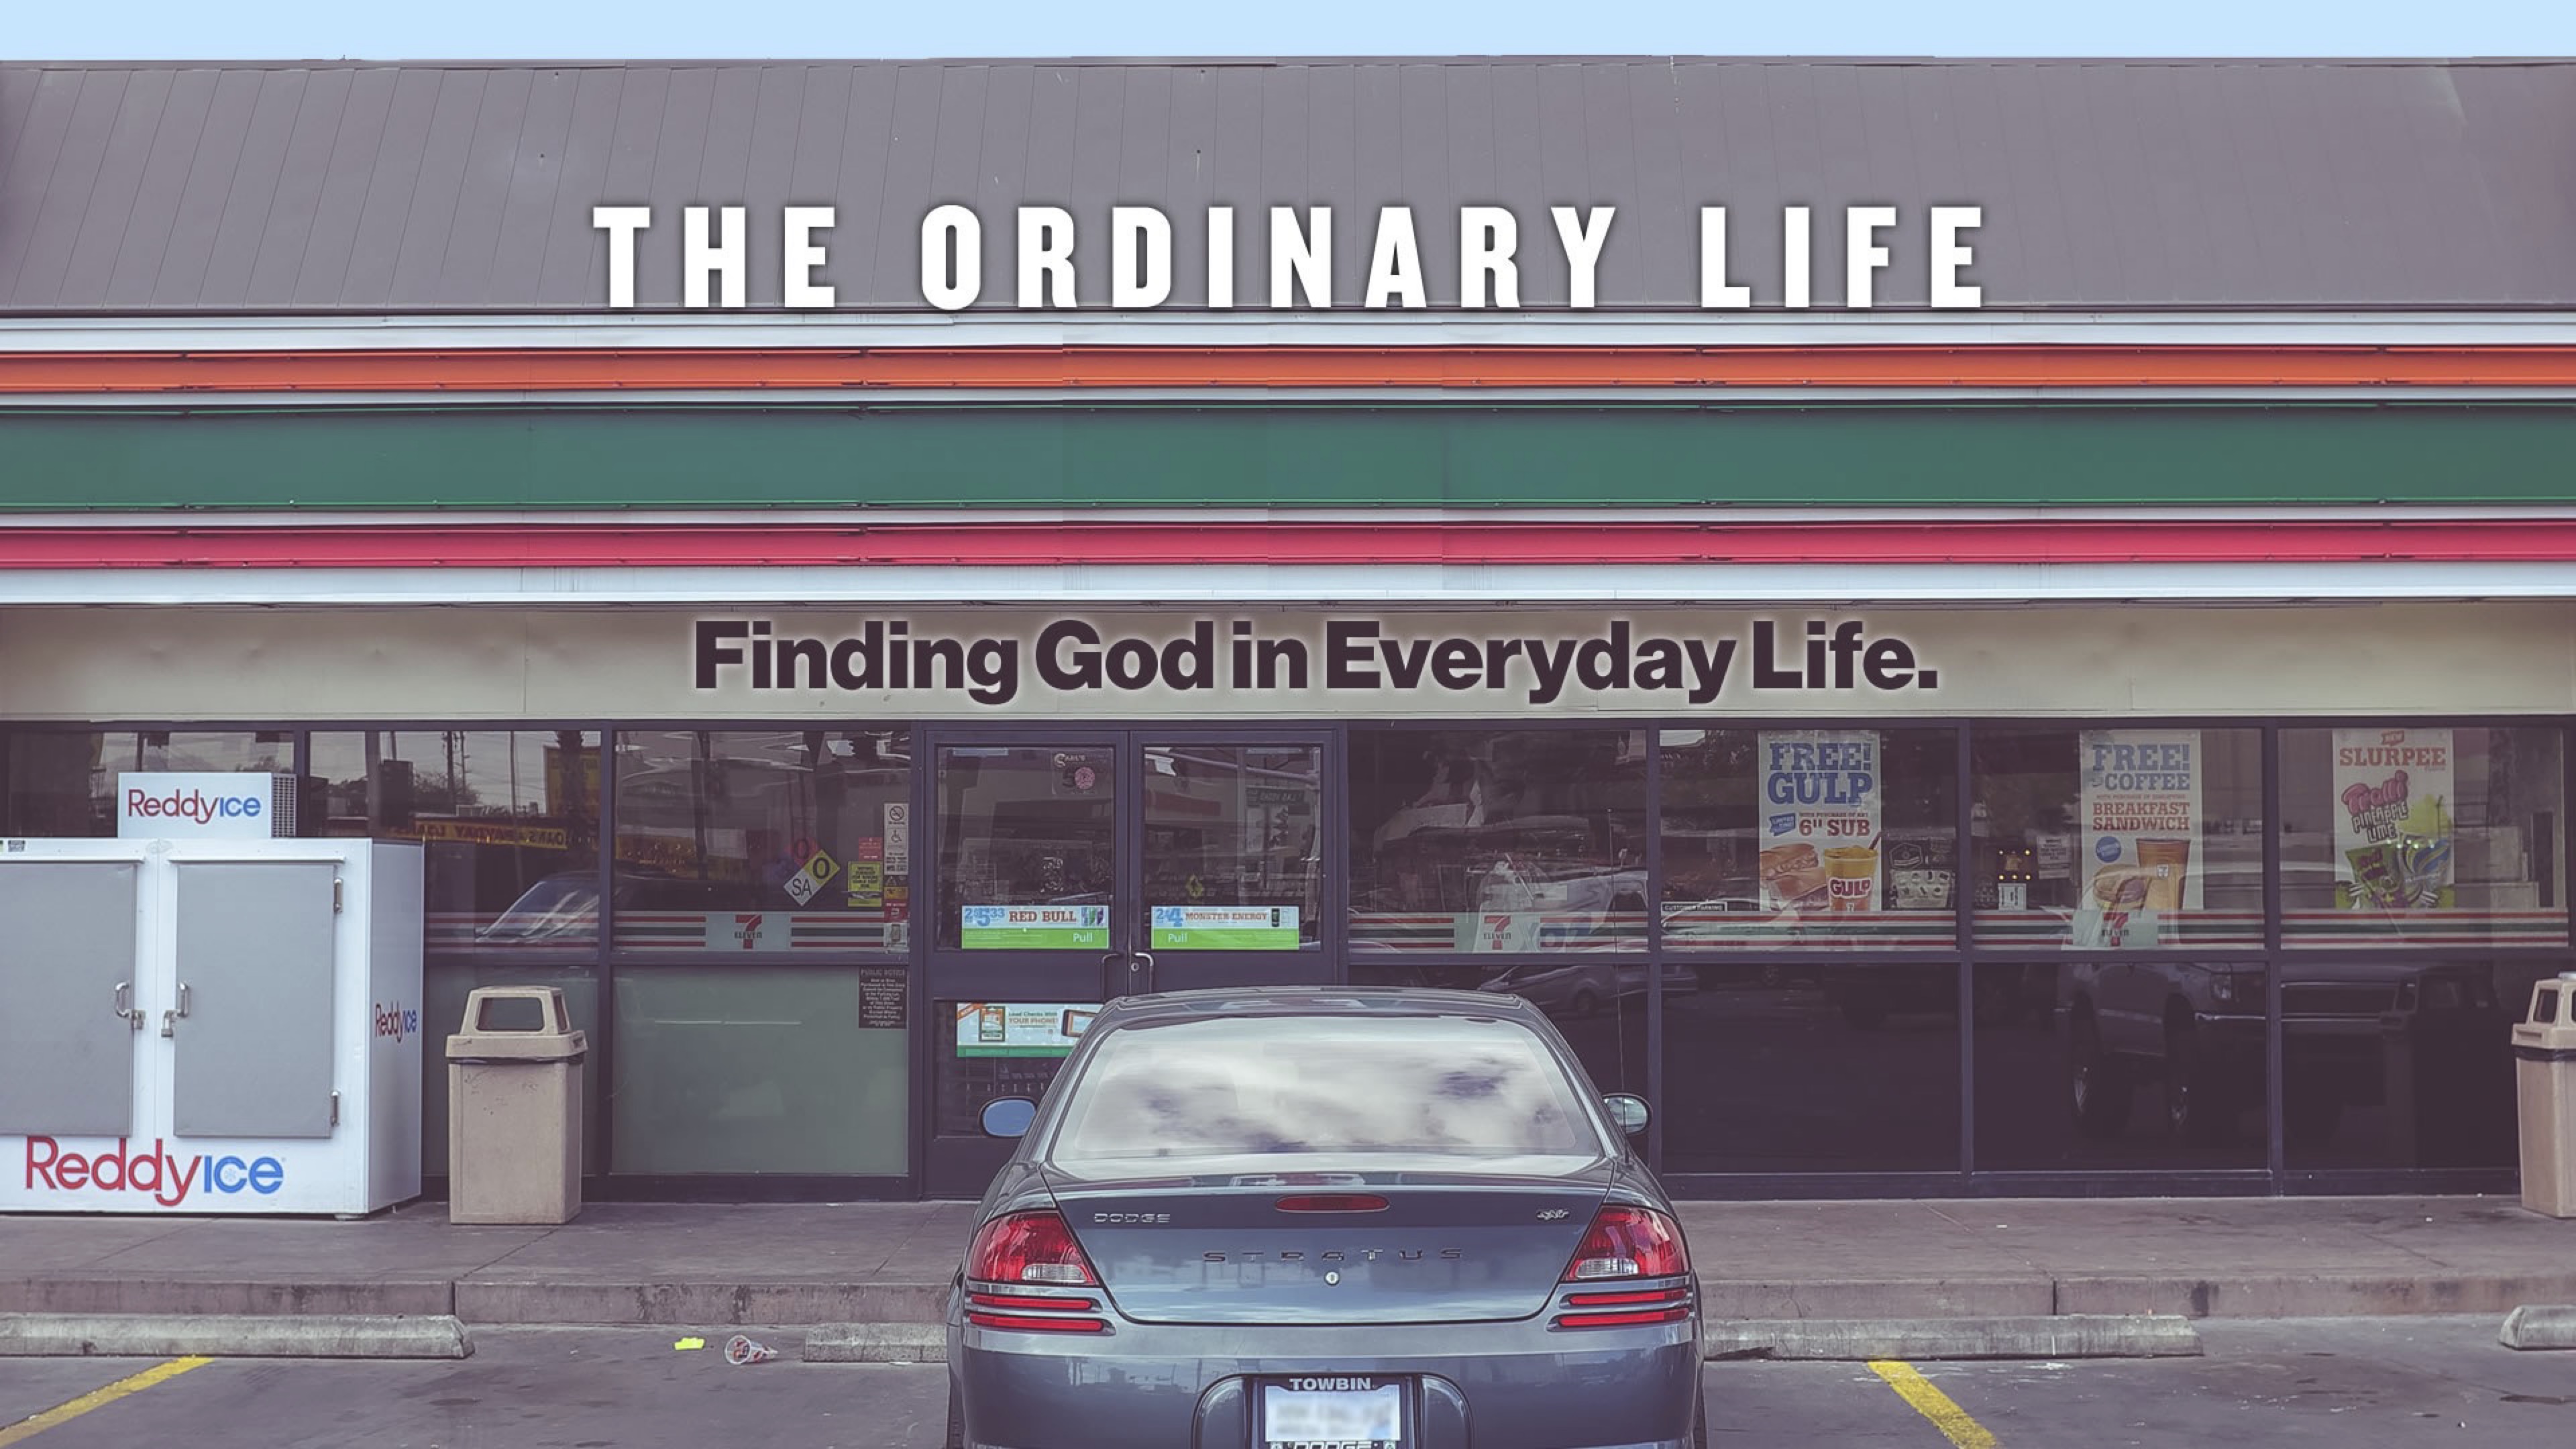 The Ordinary Life - Finding God in Everyday Life